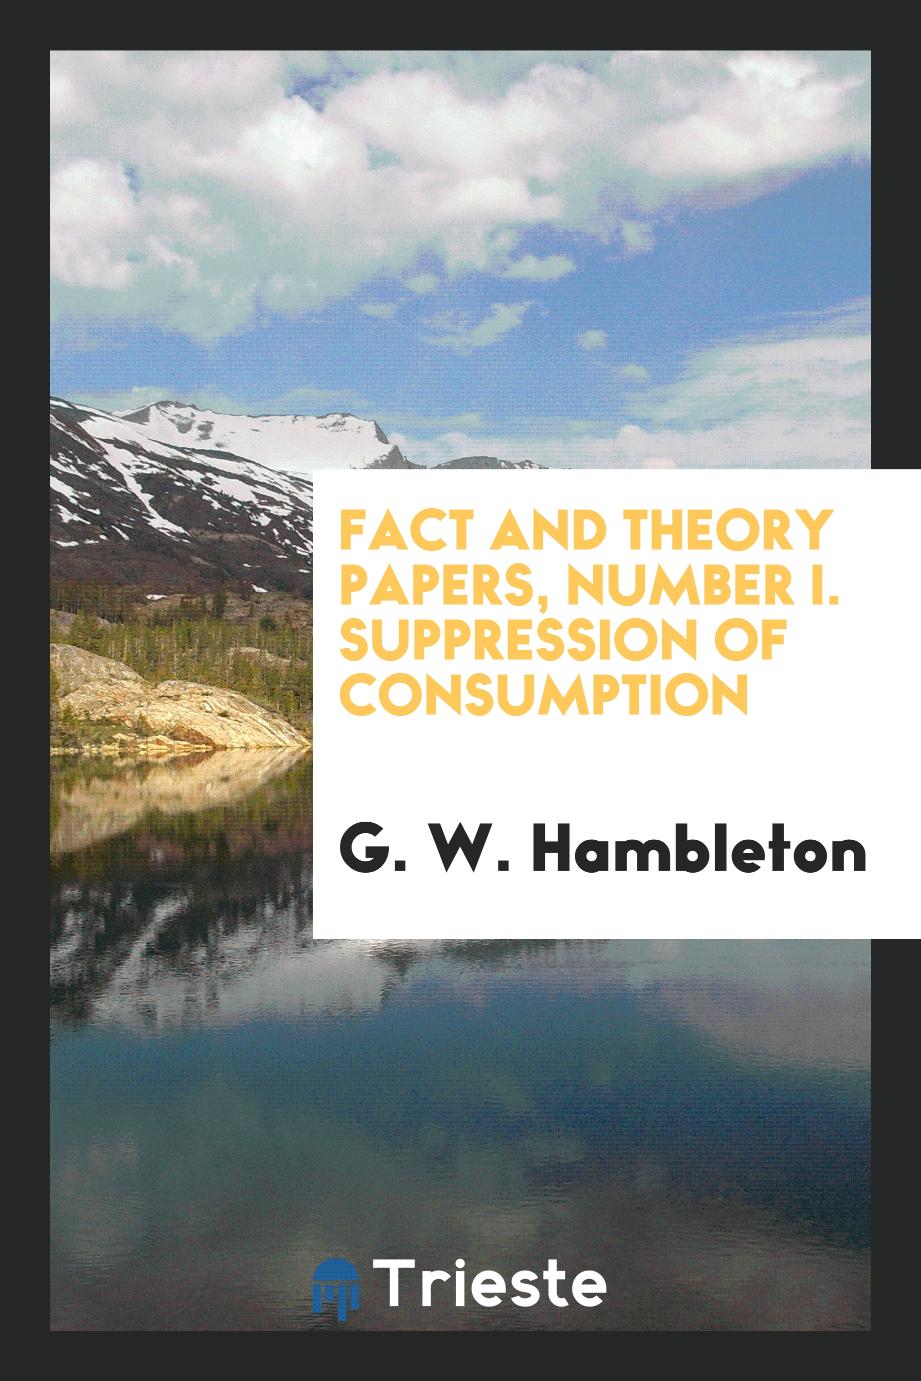 Fact and Theory Papers, Number I. Suppression of consumption